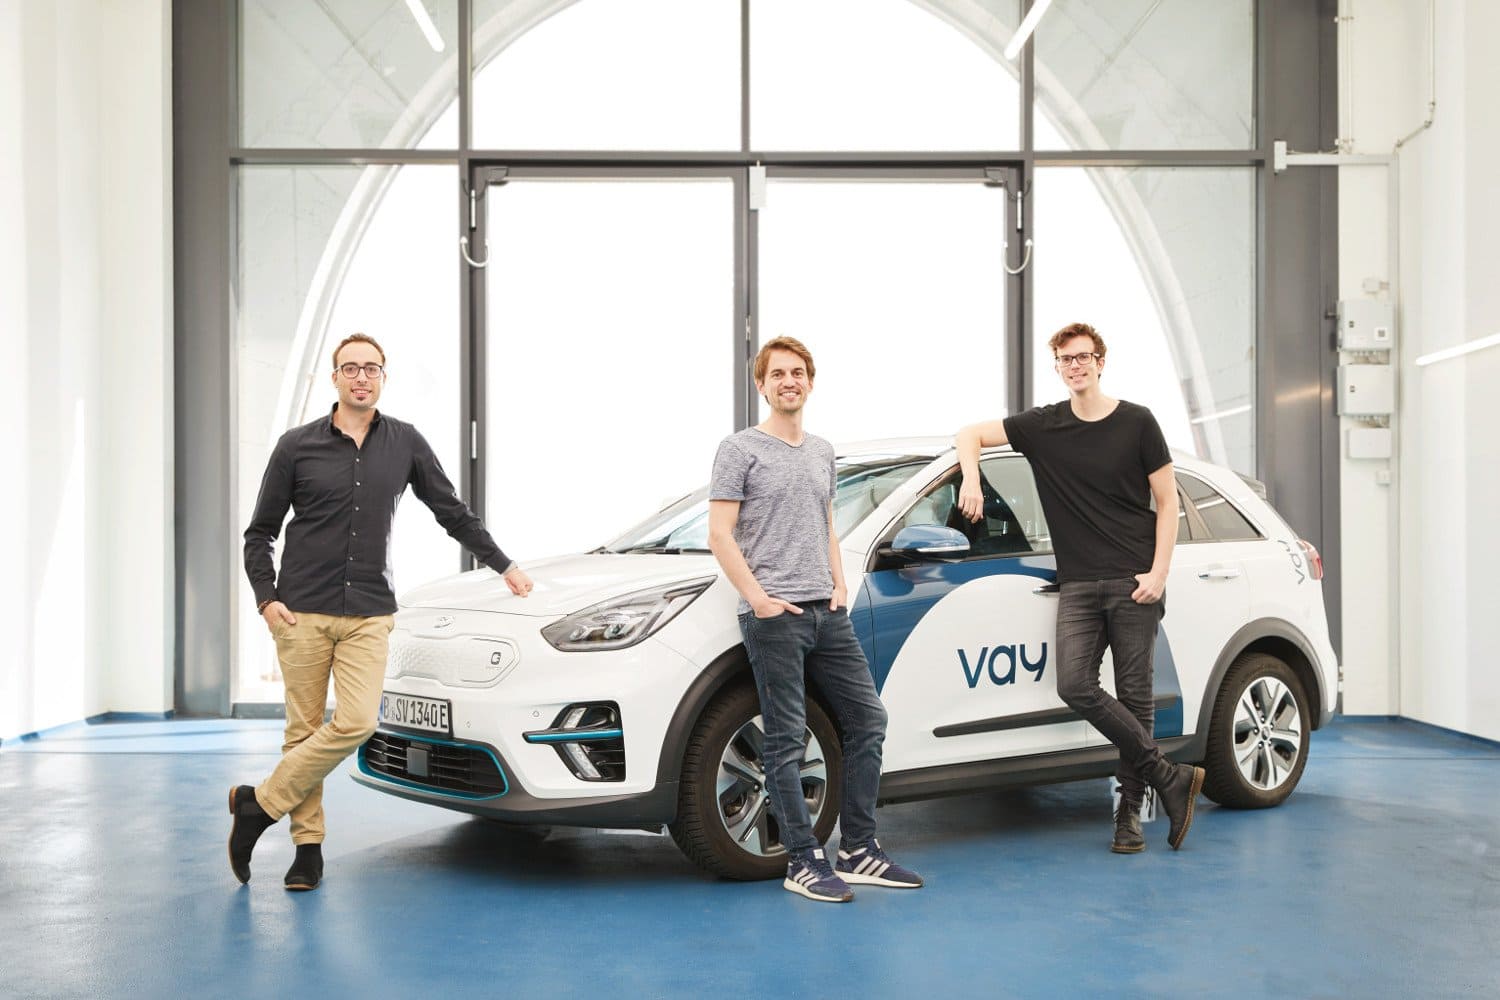 After nearly three years in stealth, Fabrizio Chelsea, Thomas von der Ohe and Bogdan Djukic (from left) introduced Vay's self-driving service in the fall.